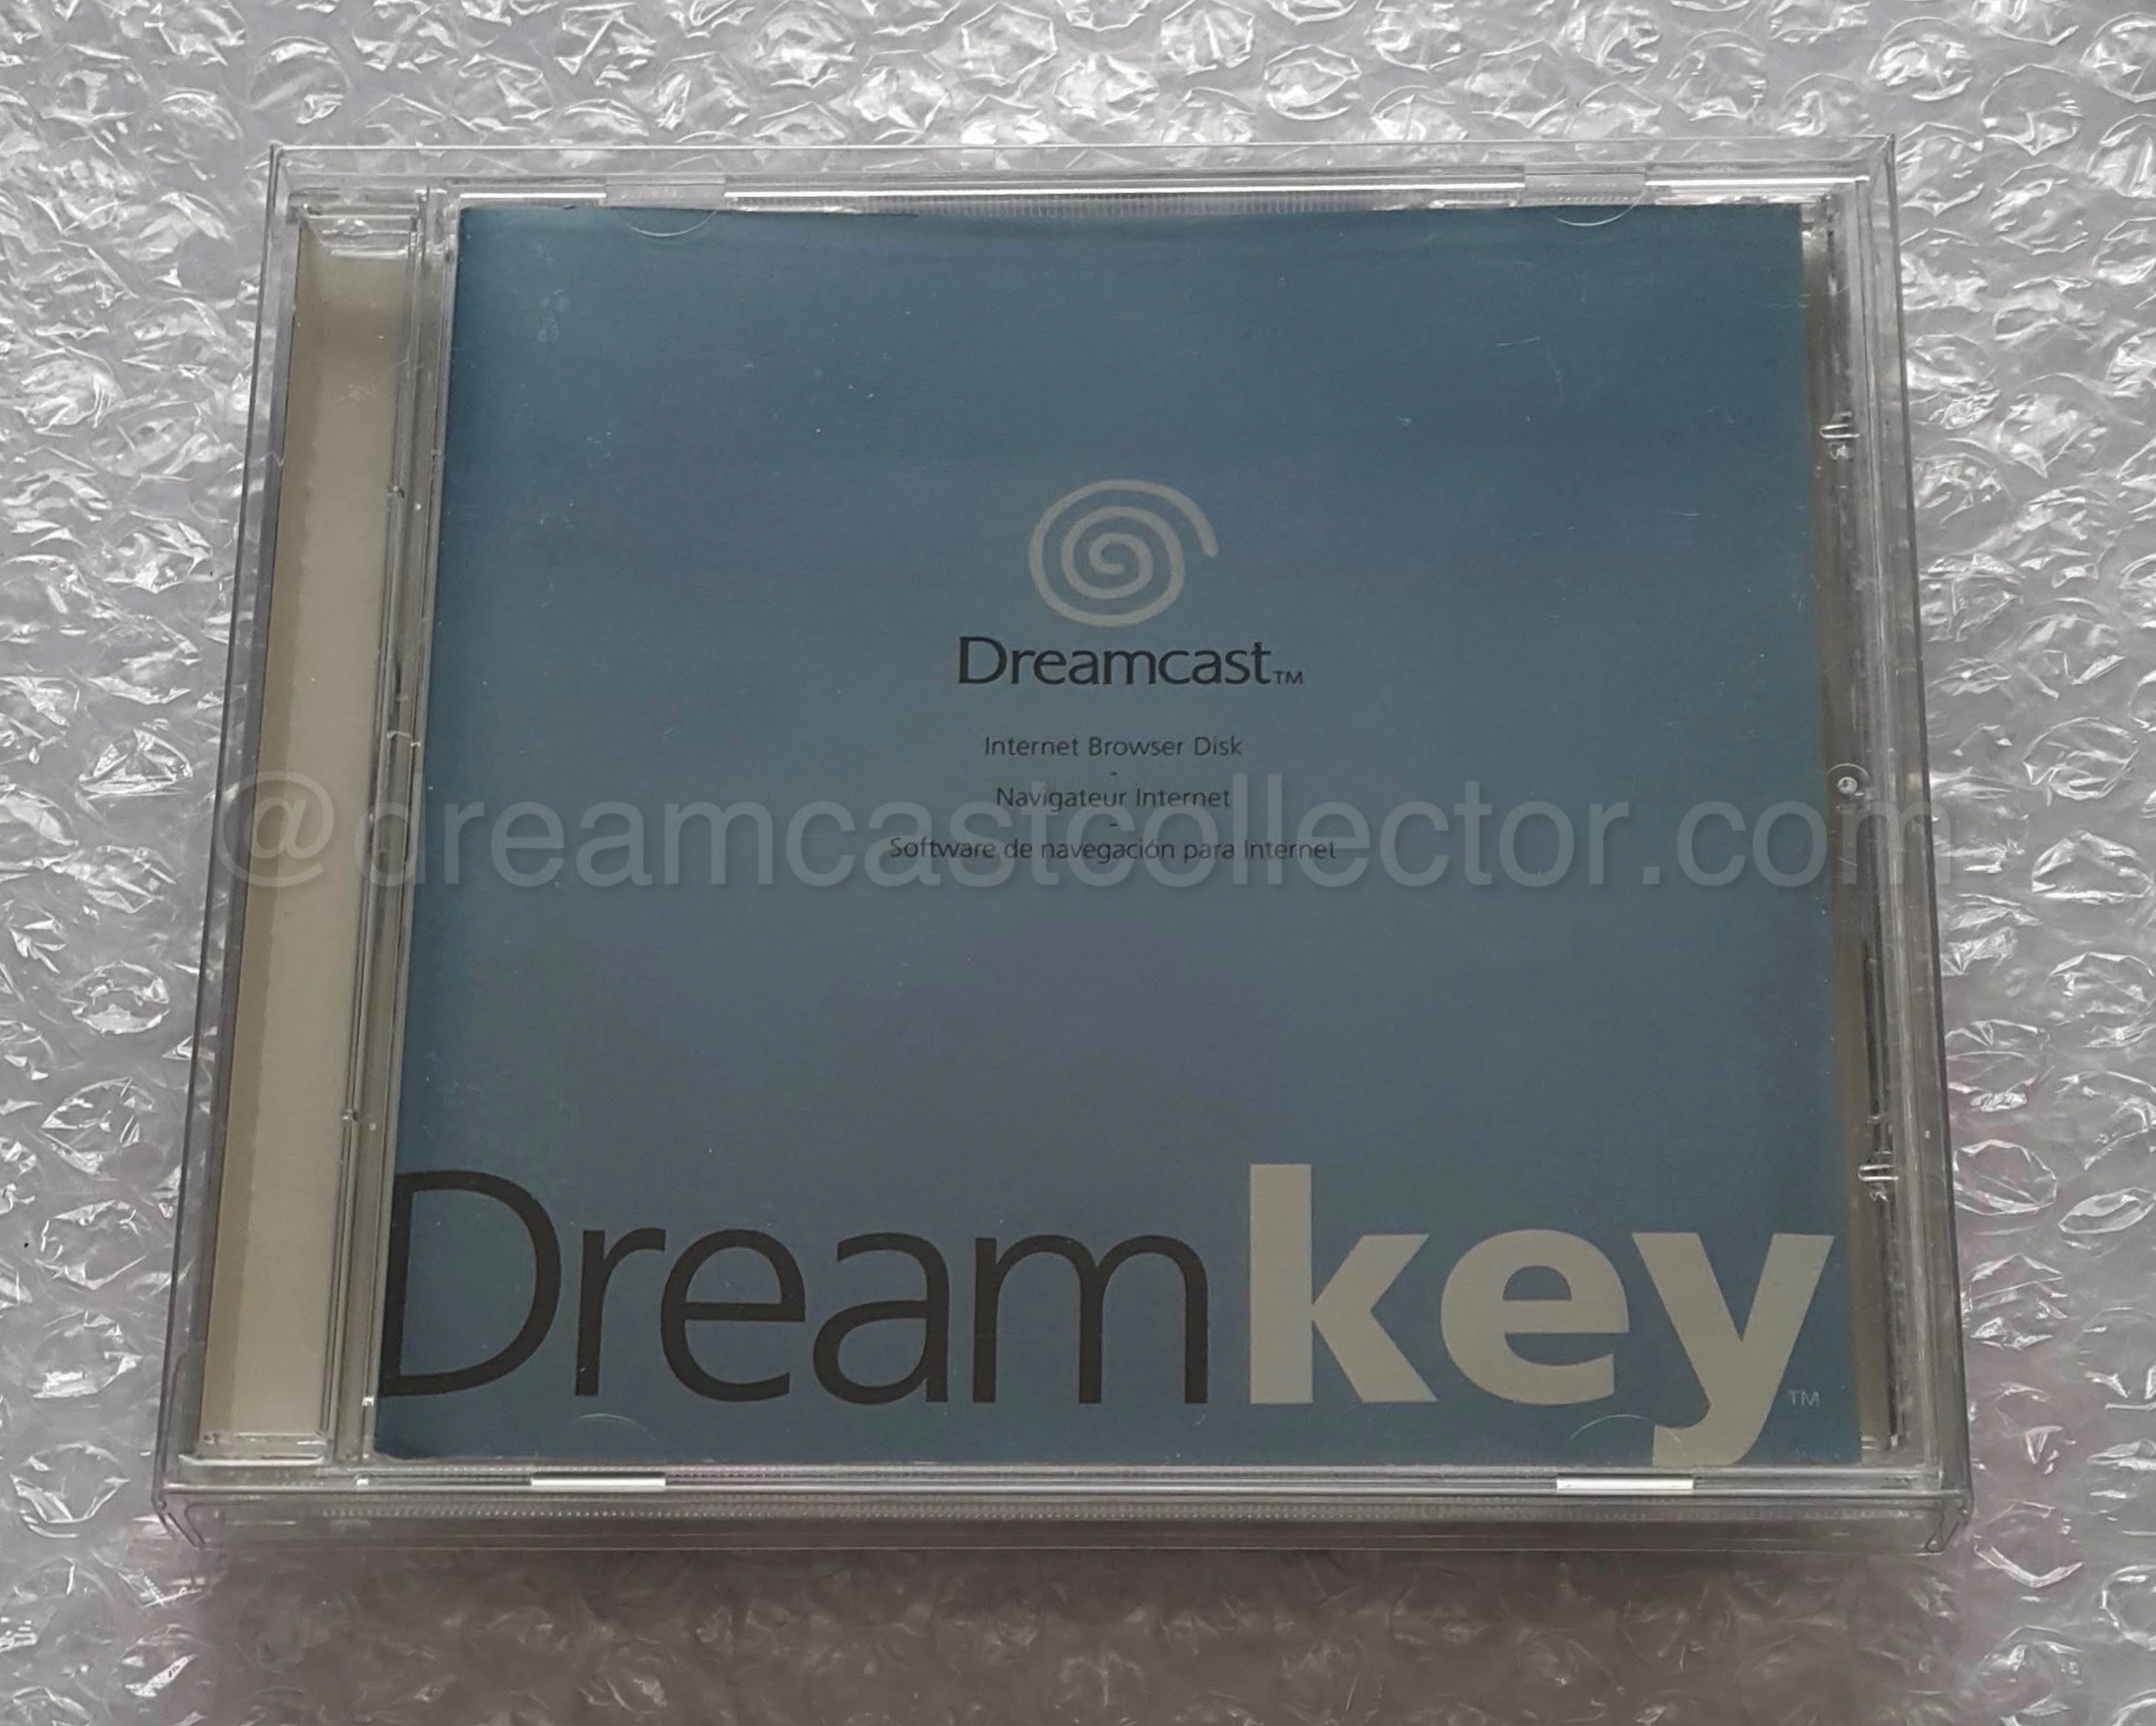 As I've mentioned, I'm at a loss to explain exactly why France received their own DreamKey browsers when the general release allowed online access for French owners. It's clear that whatever the reason SEGA wanted this regional exclusive to be visually unique compared to more common release hence the metallic blue colour scheme employed for this release.